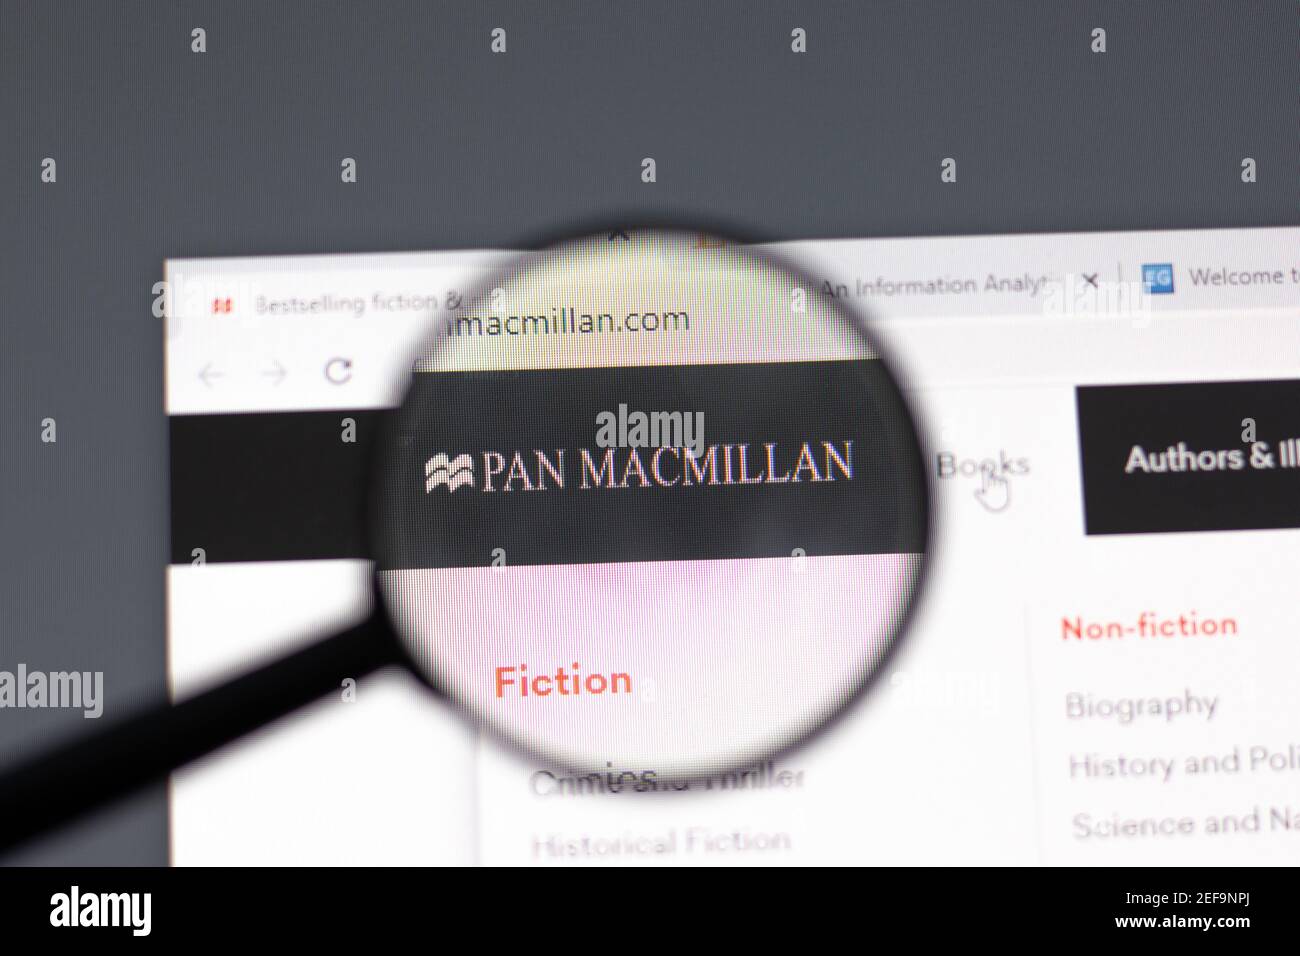 New York, USA - 15 February 2021: Pan Macmillan website in browser with company logo, Illustrative Editorial Stock Photo